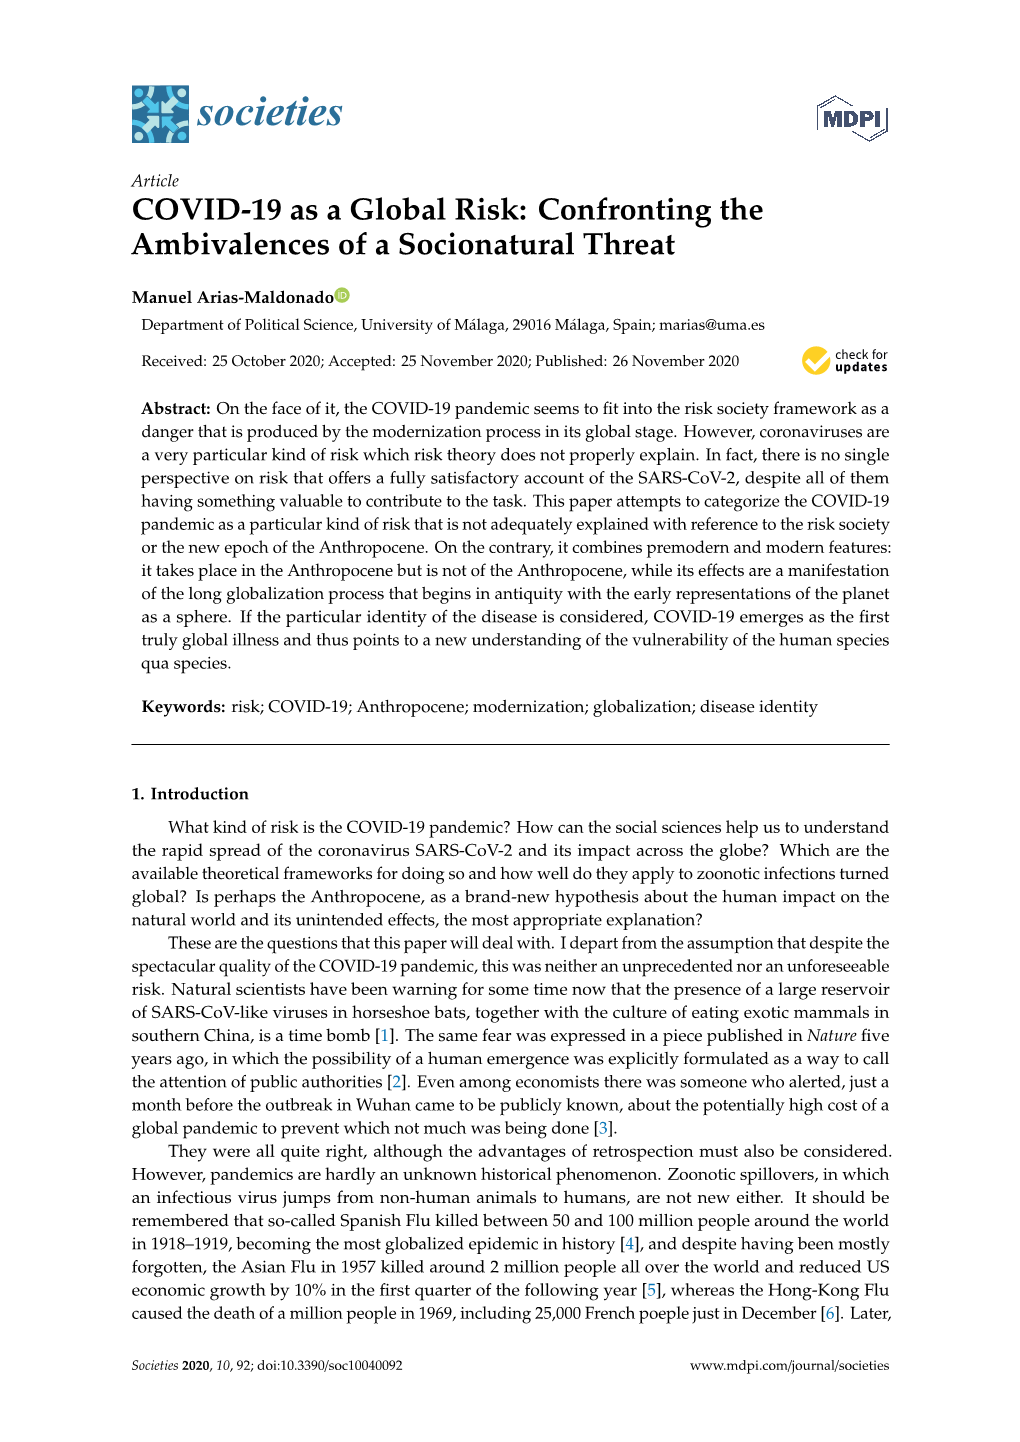 COVID-19 As a Global Risk: Confronting the Ambivalences of a Socionatural Threat